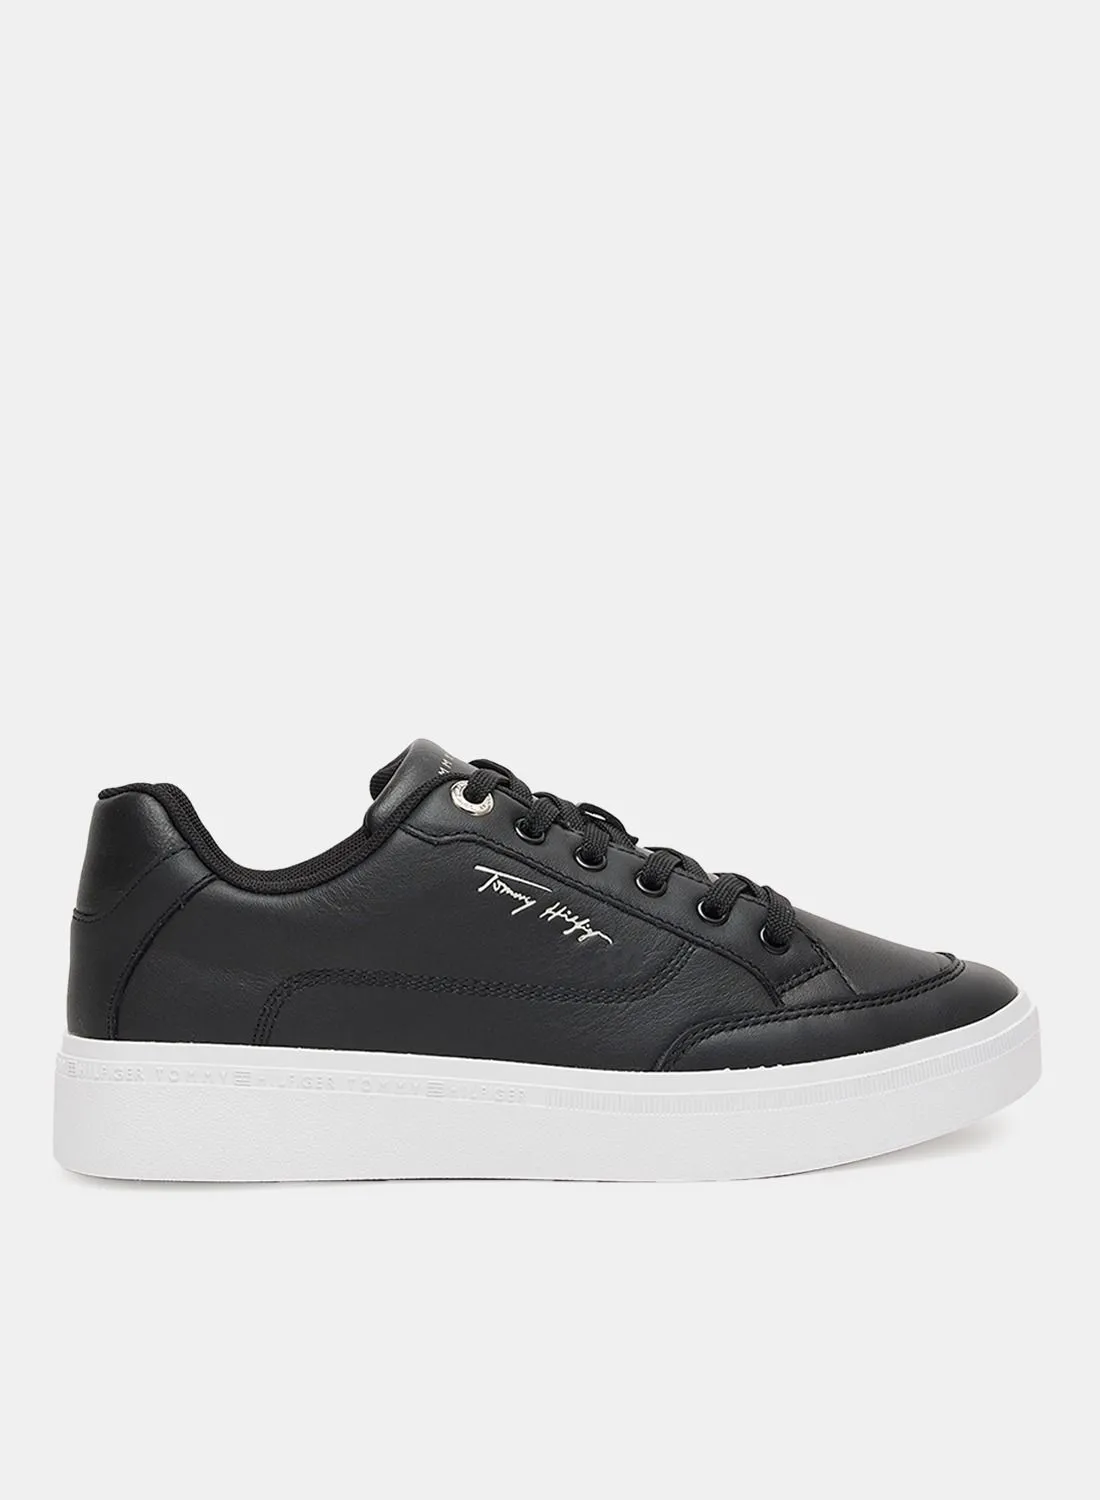 TOMMY HILFIGER Essential Leather Signature Sneakers